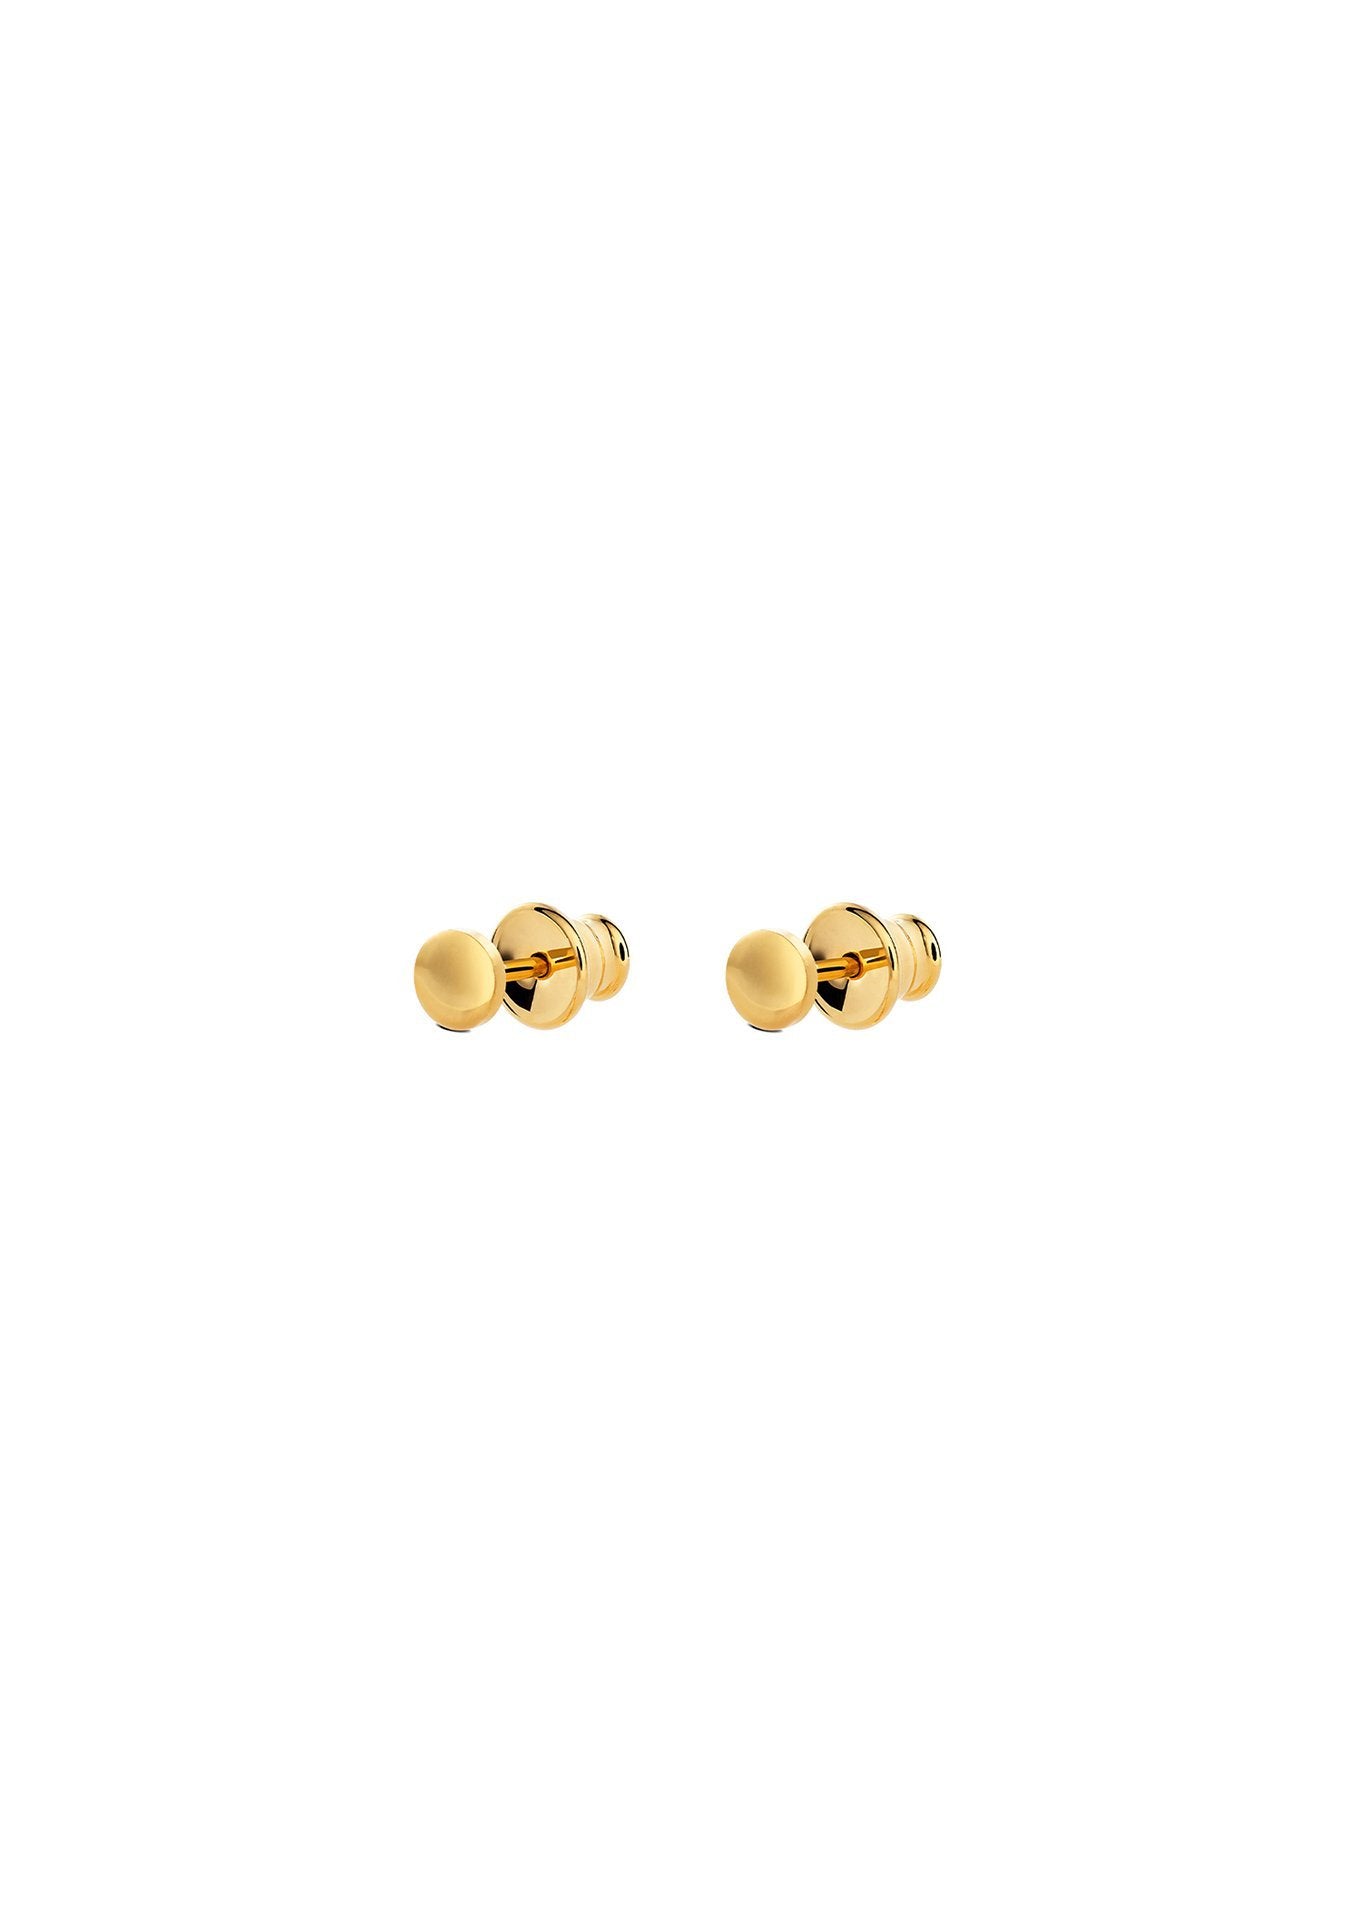 NO MORE accessories Small 'n' Cozy Earrings in gold plated sterling silver